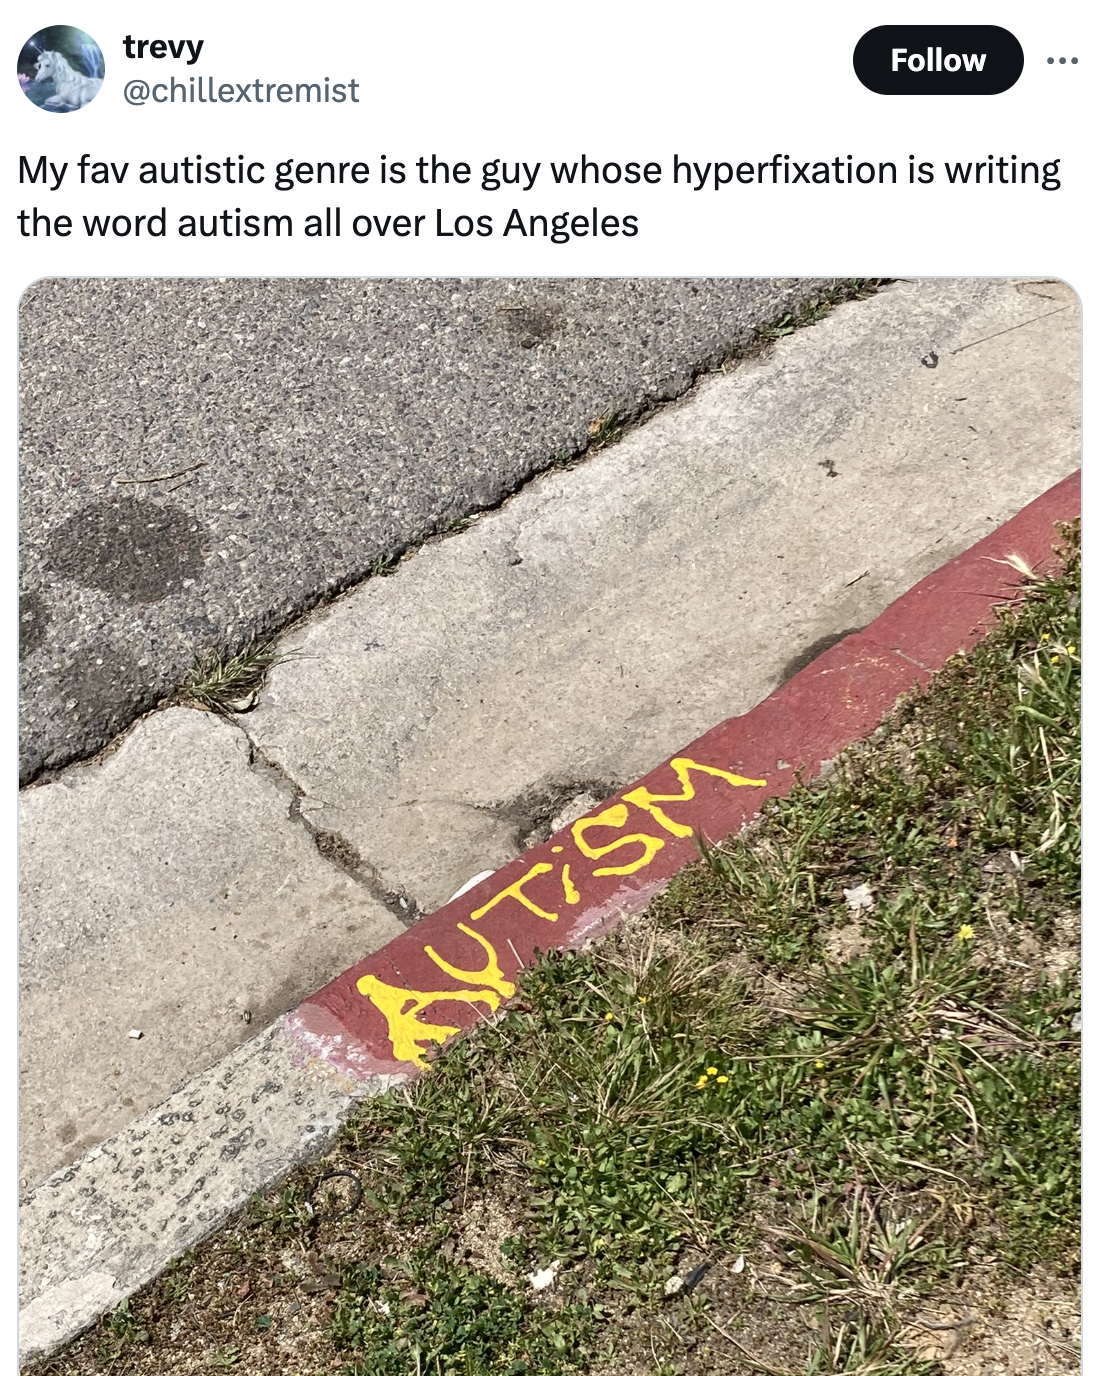 sidewalk - trevy My fav autistic genre is the guy whose hyperfixation is writing the word autism all over Los Angeles Autism